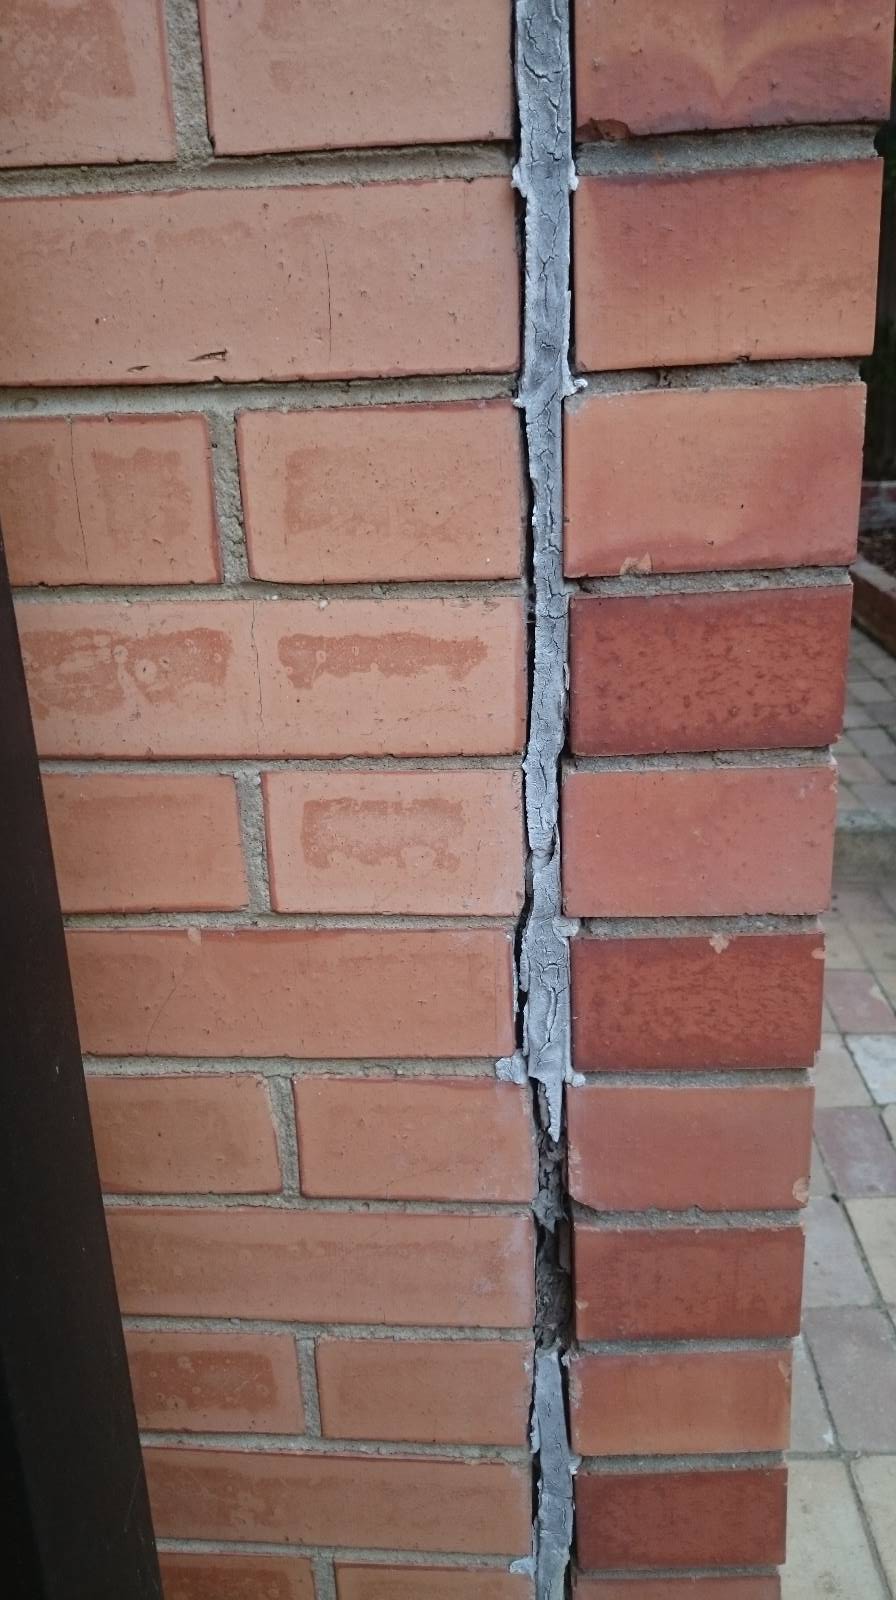 Expansion Joint in Brickwork - Replacing the Old Filler